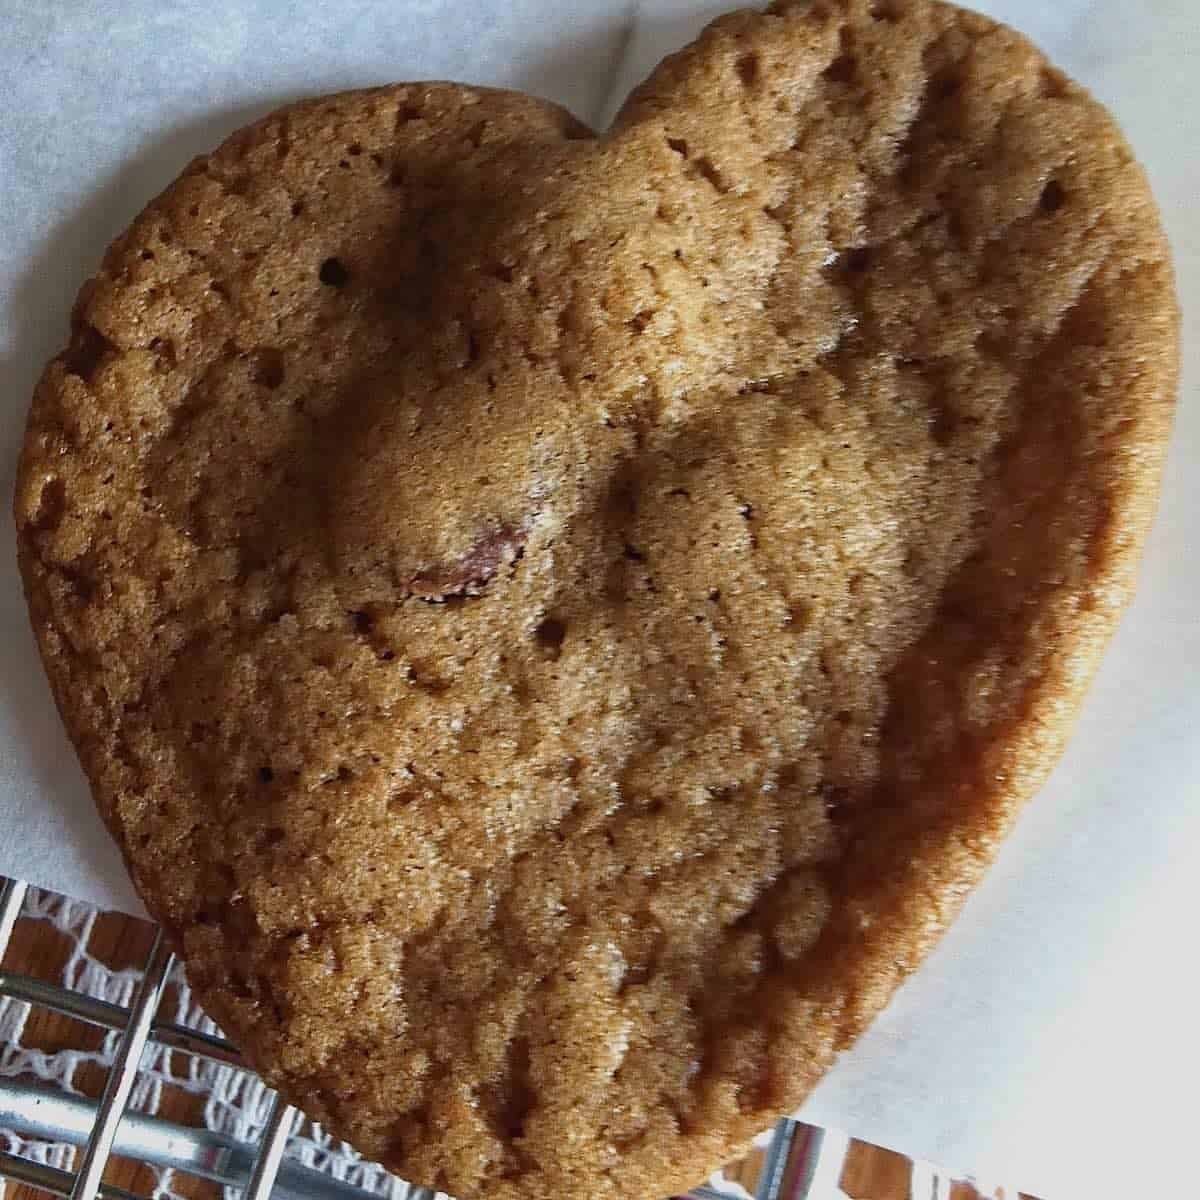 The best recipes list include my heart shaped chocolate chip cookie.